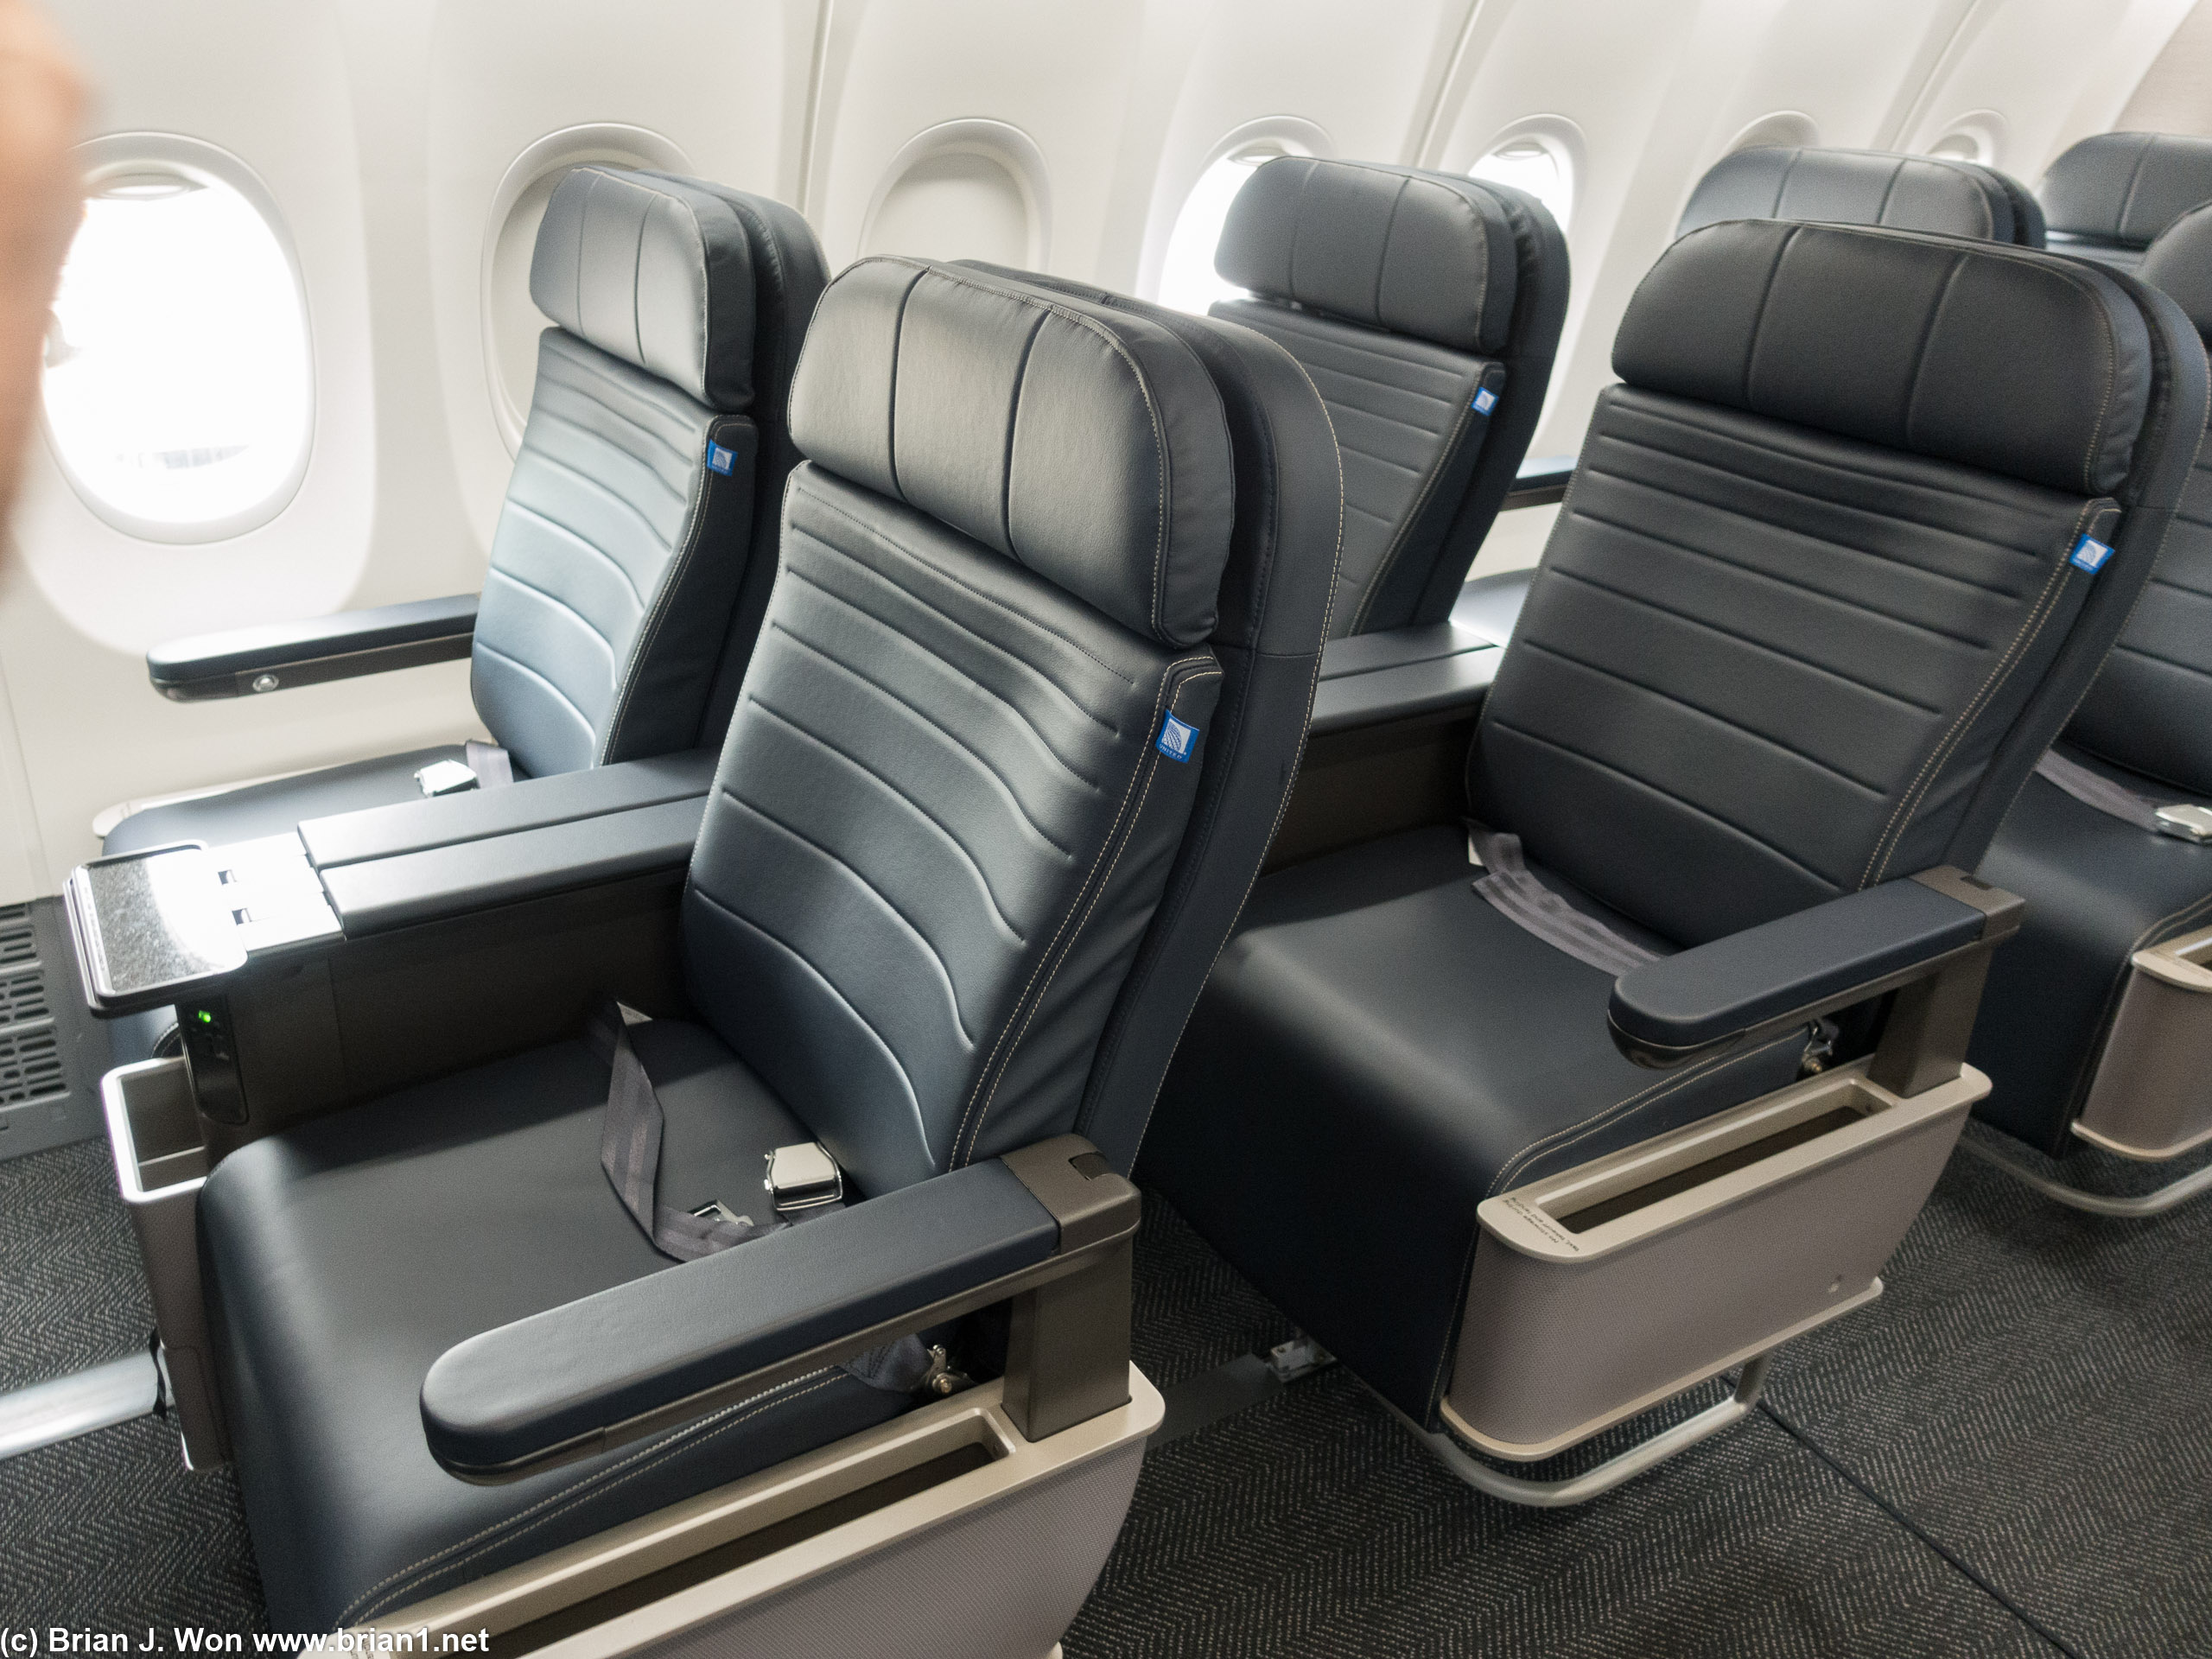 United's "new" first class seat is now more than 5 years old.